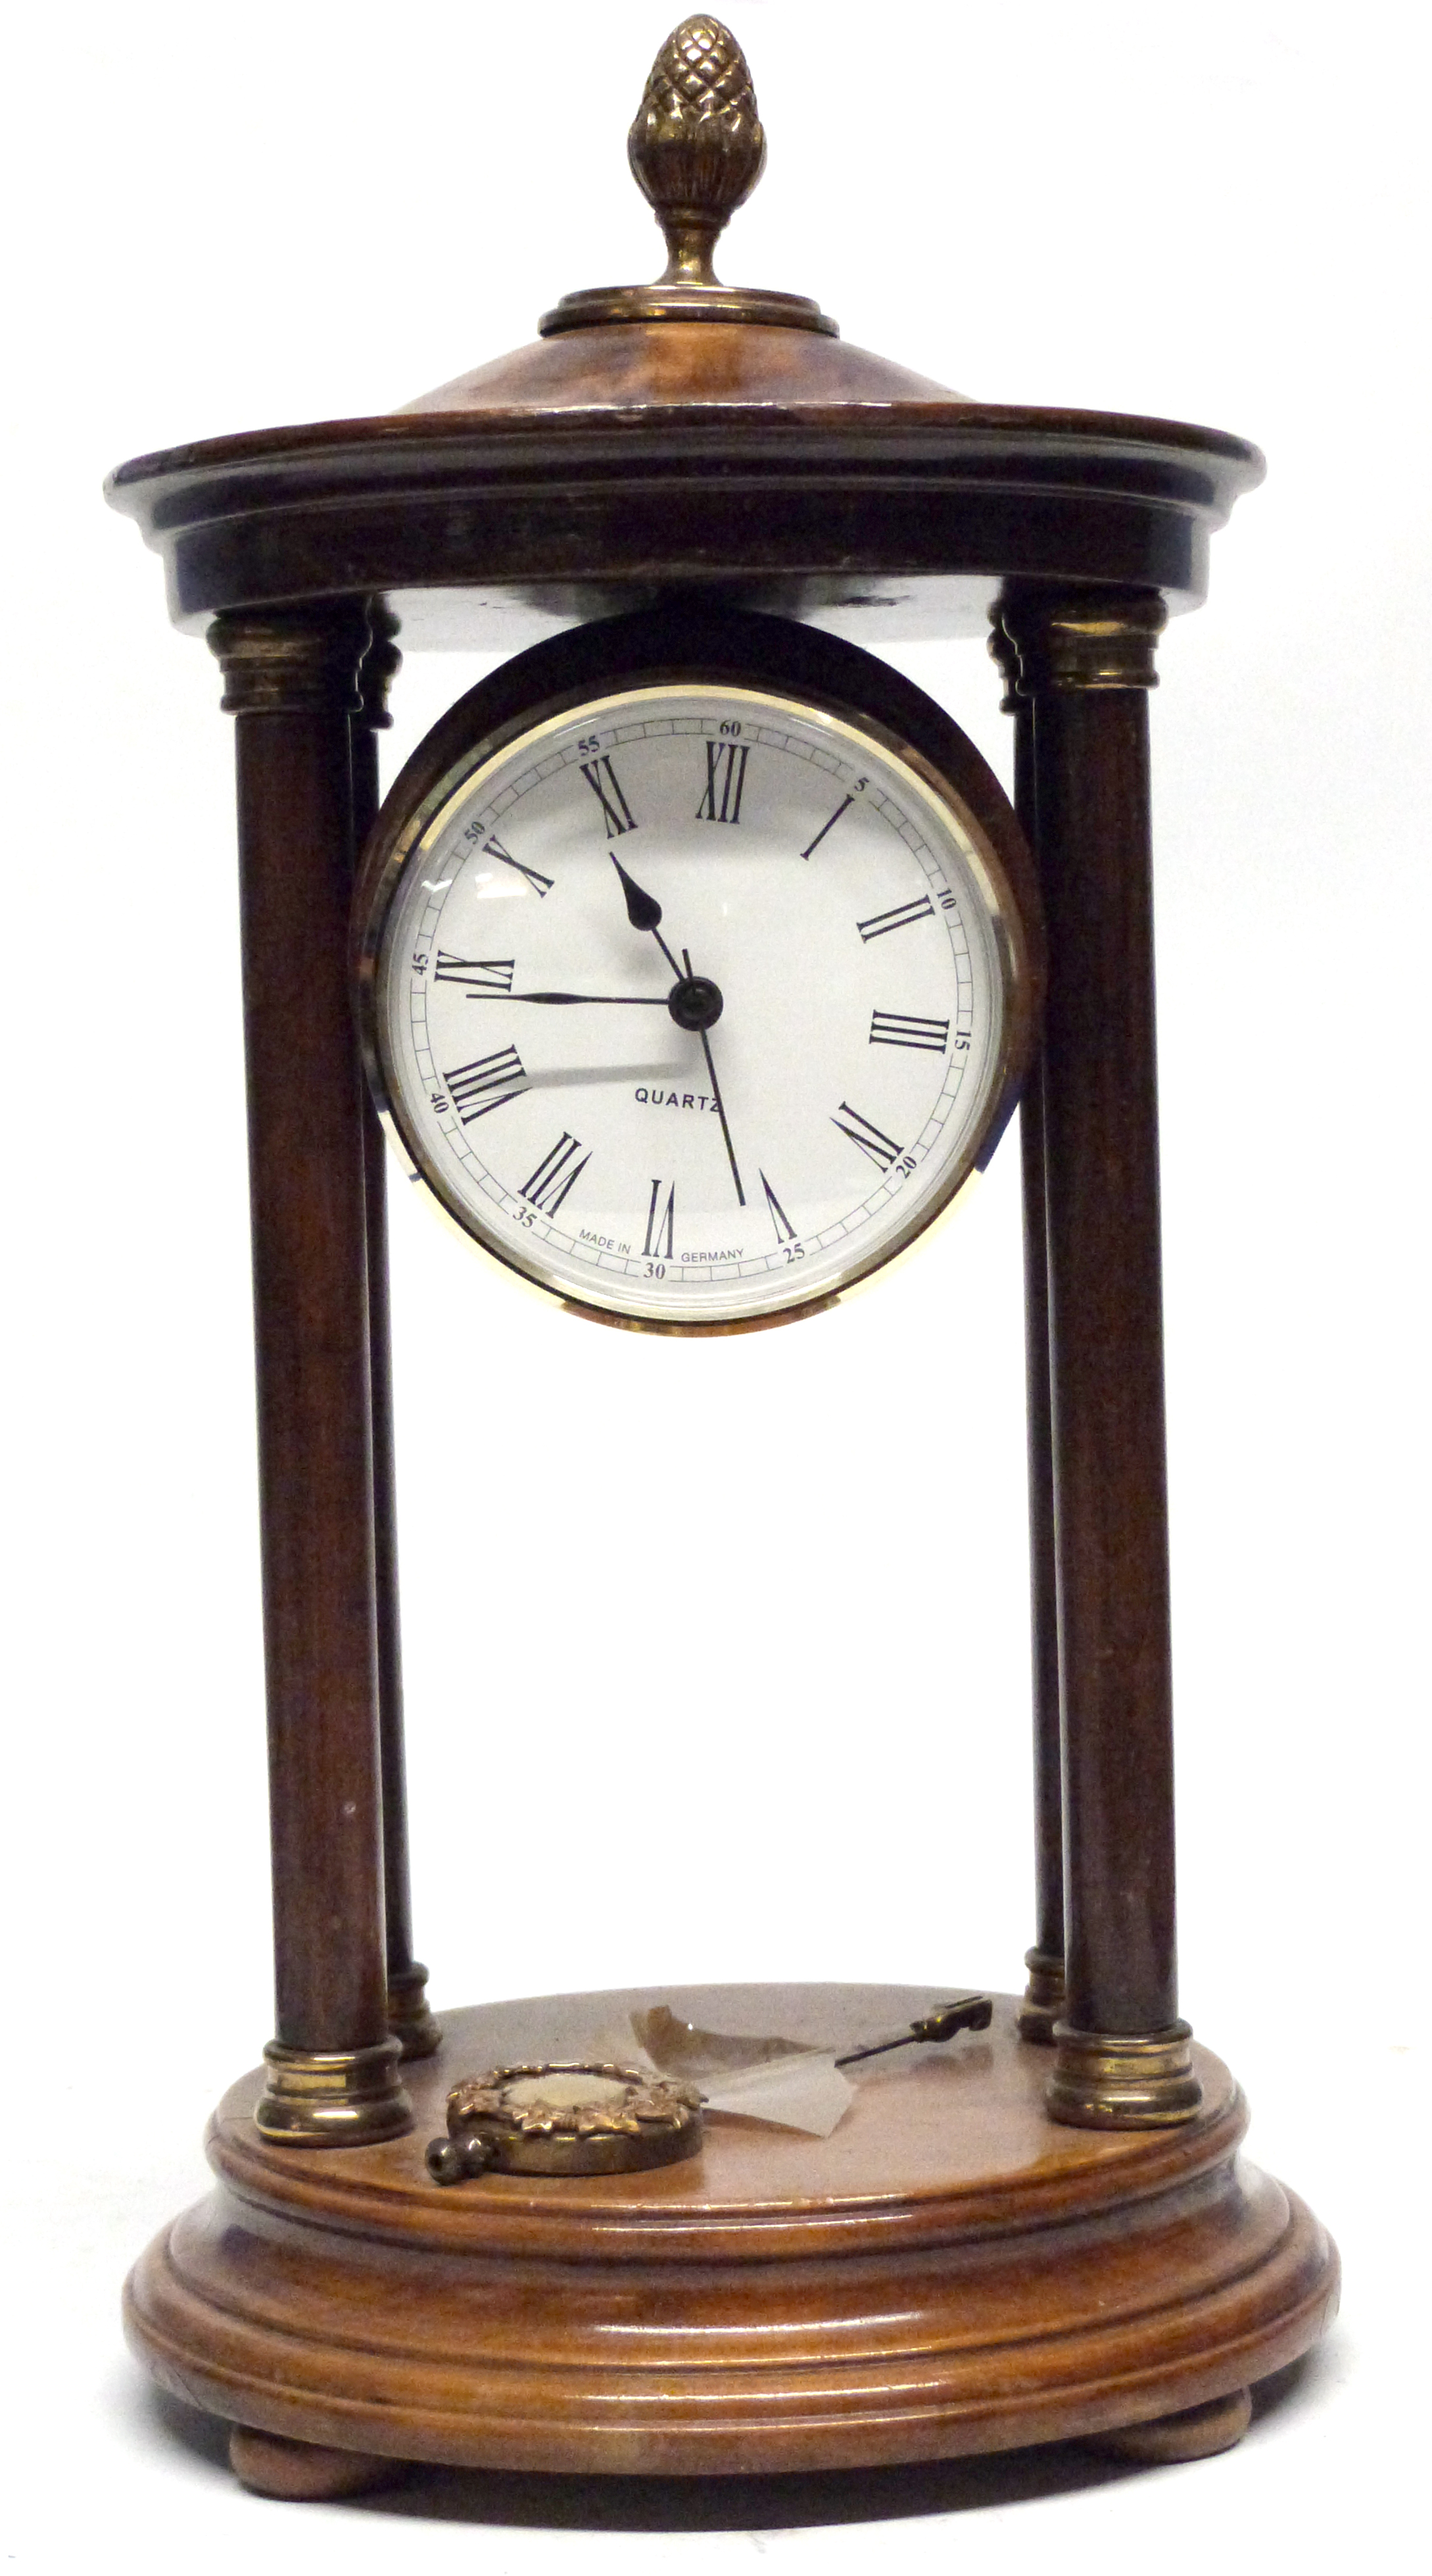 Quartz clock in wooden case, supported by four wooden pillars, with brass acorn knop, 27cm high